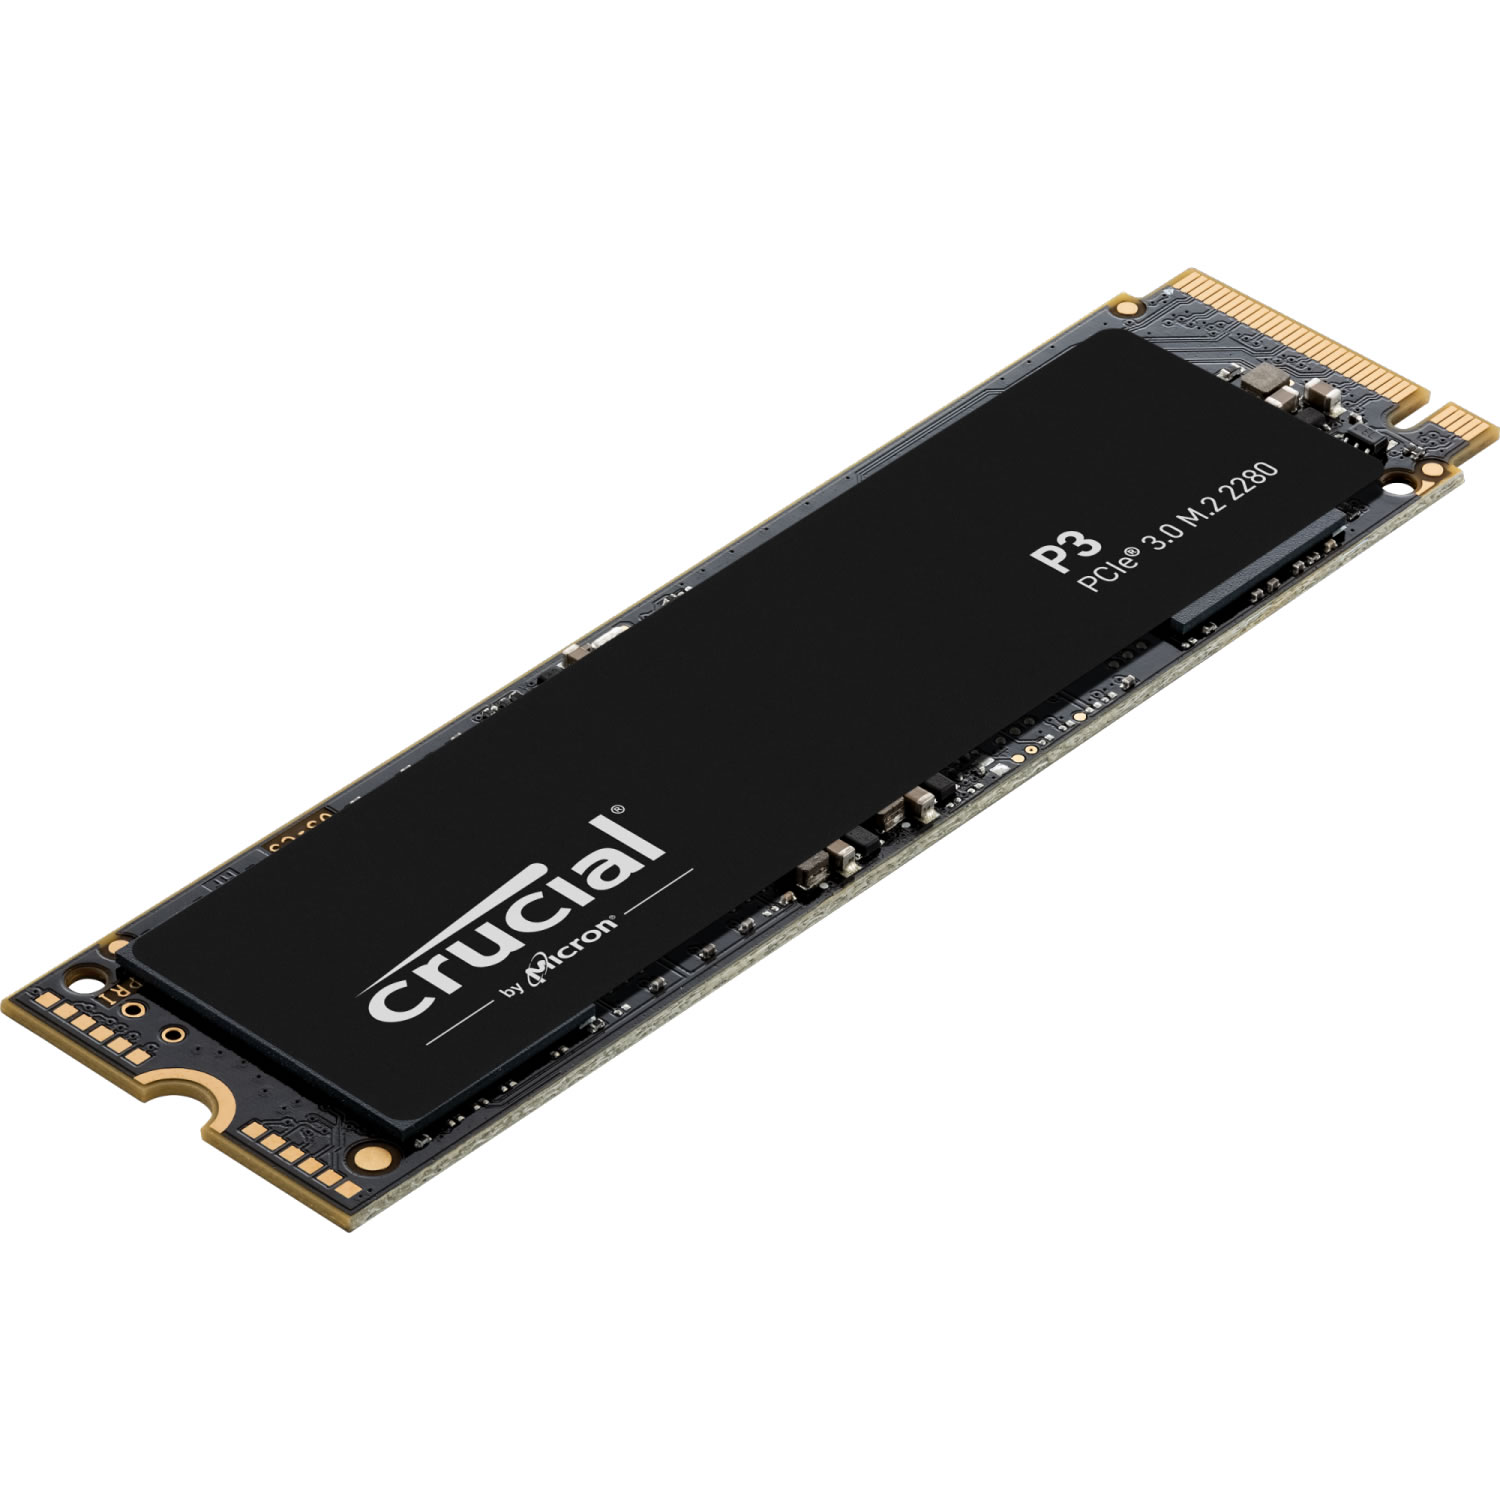 Crucial P3 1TB M.2 2280 PCI-e 3.0 NVMe Solid State Drive